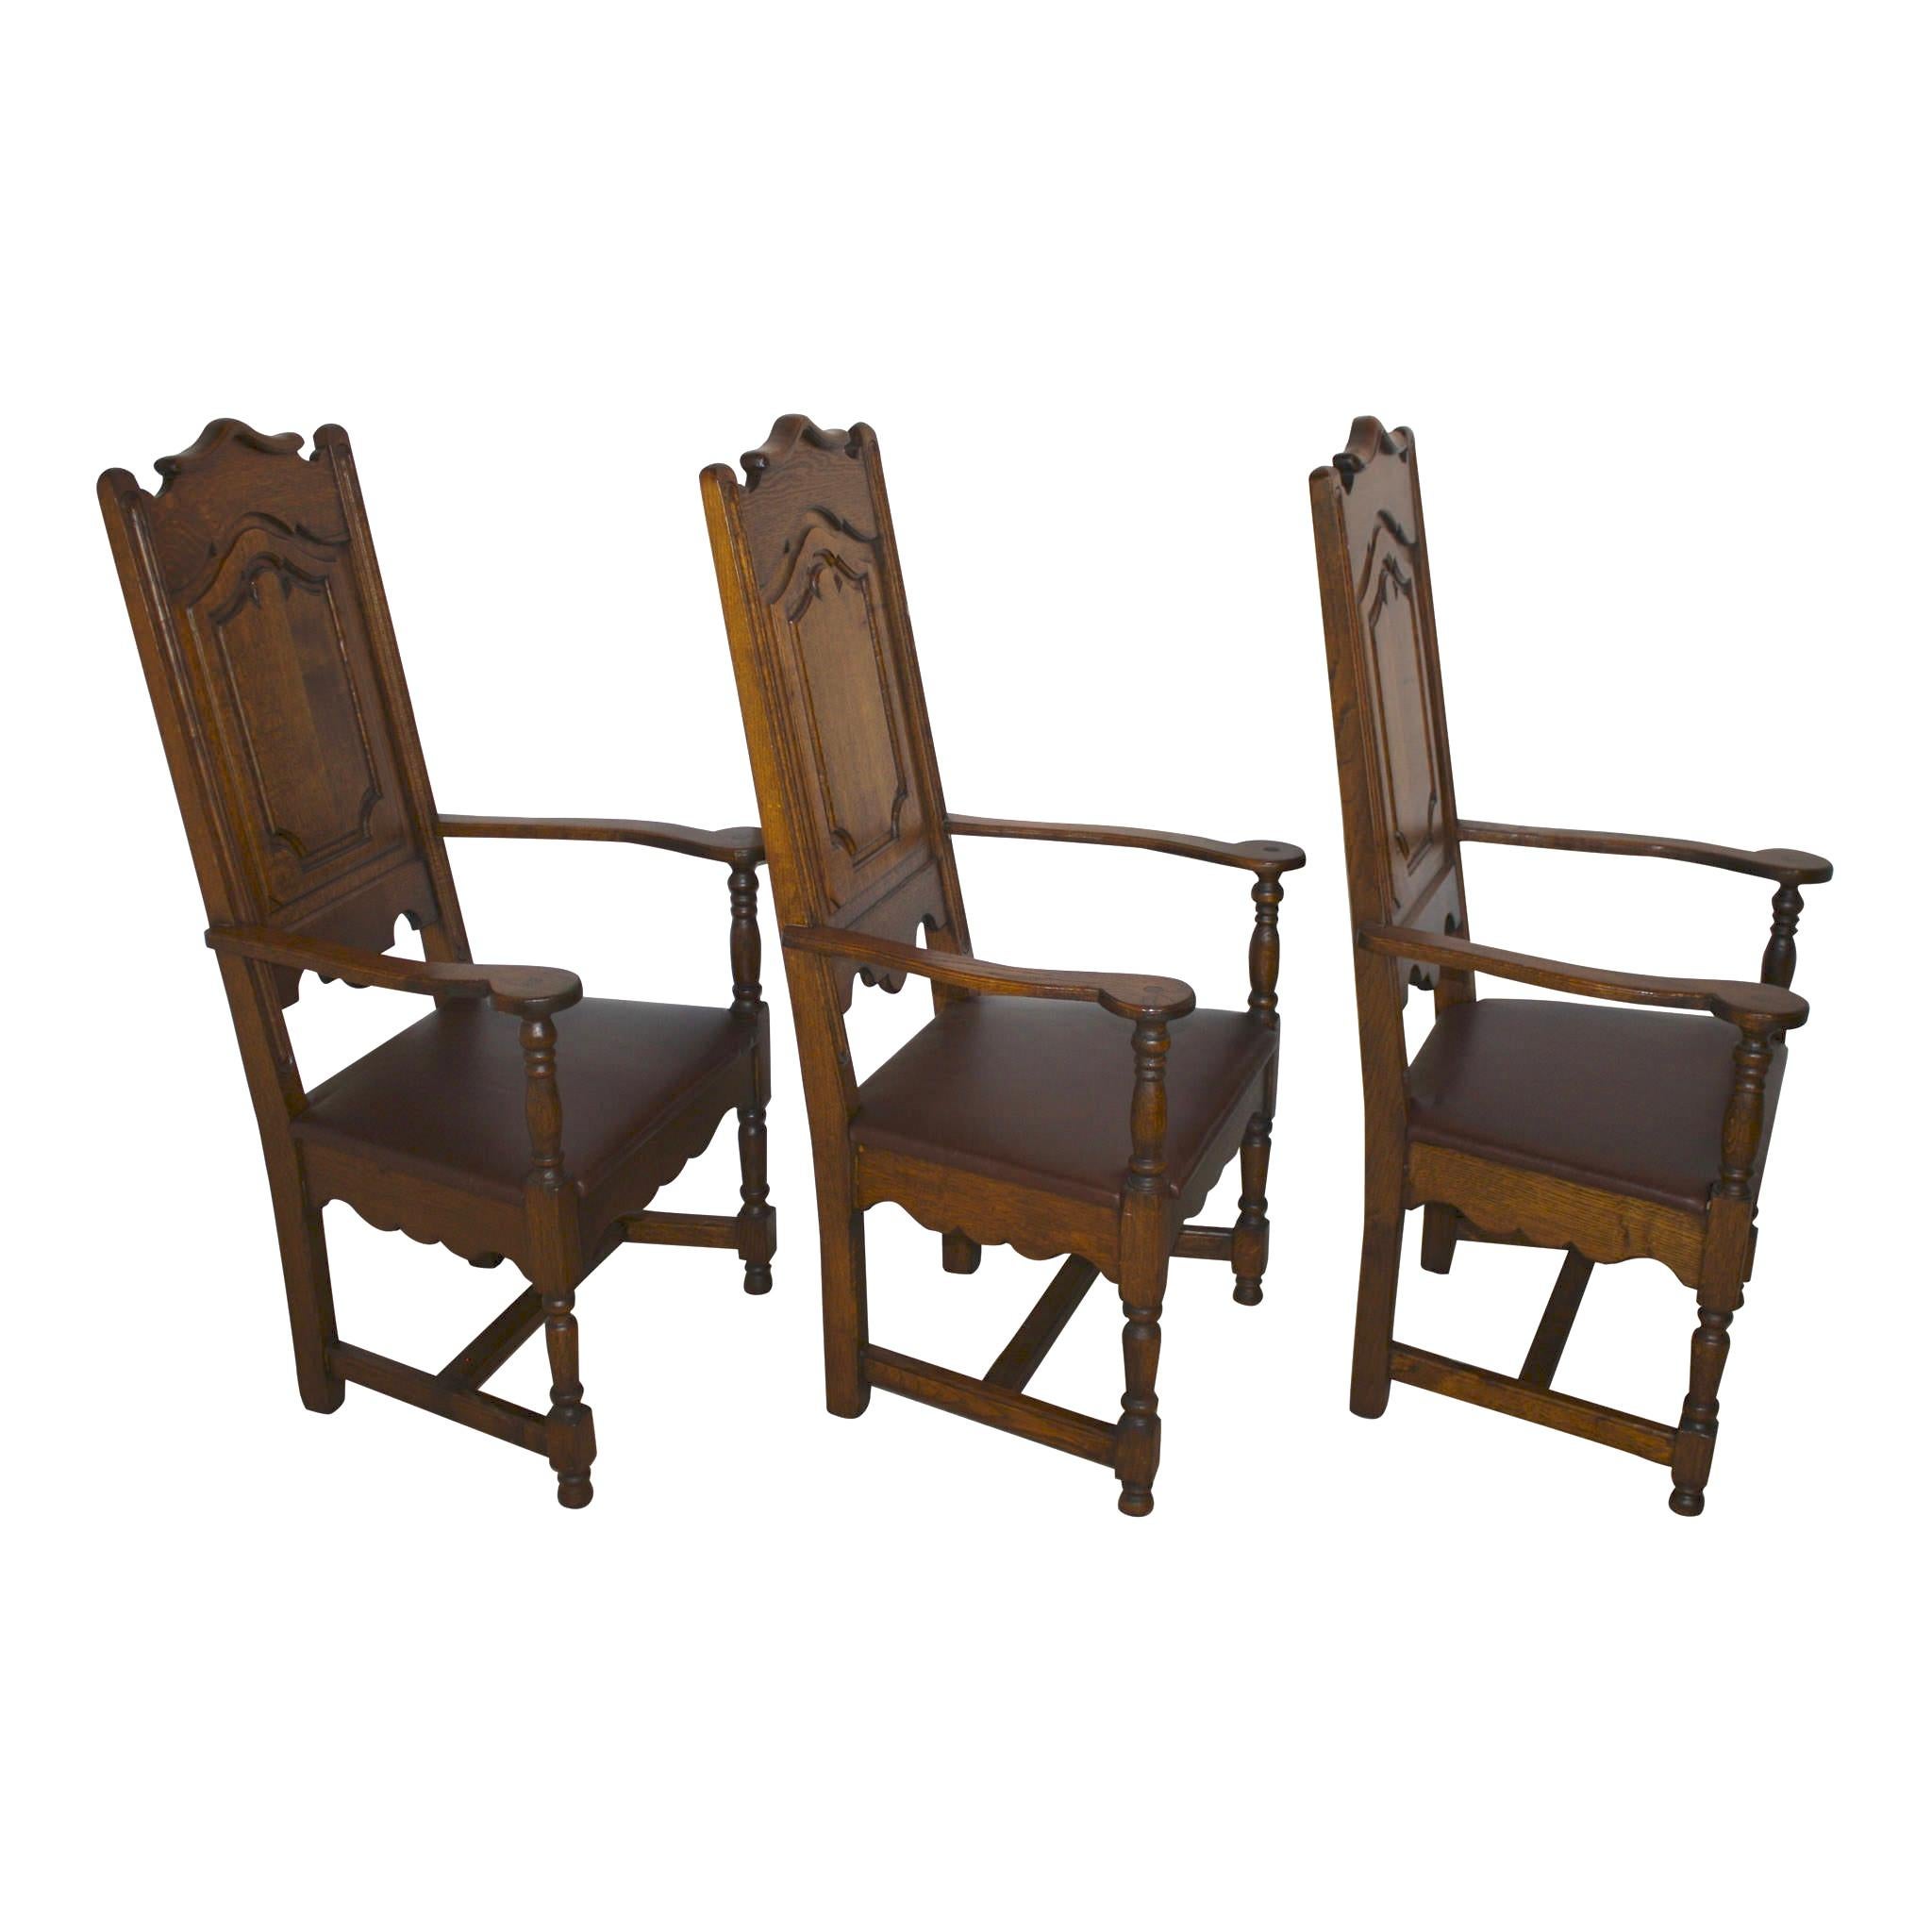 20th Century High Back Oak Armchairs with Leather Seats, Set of Six, circa 1910